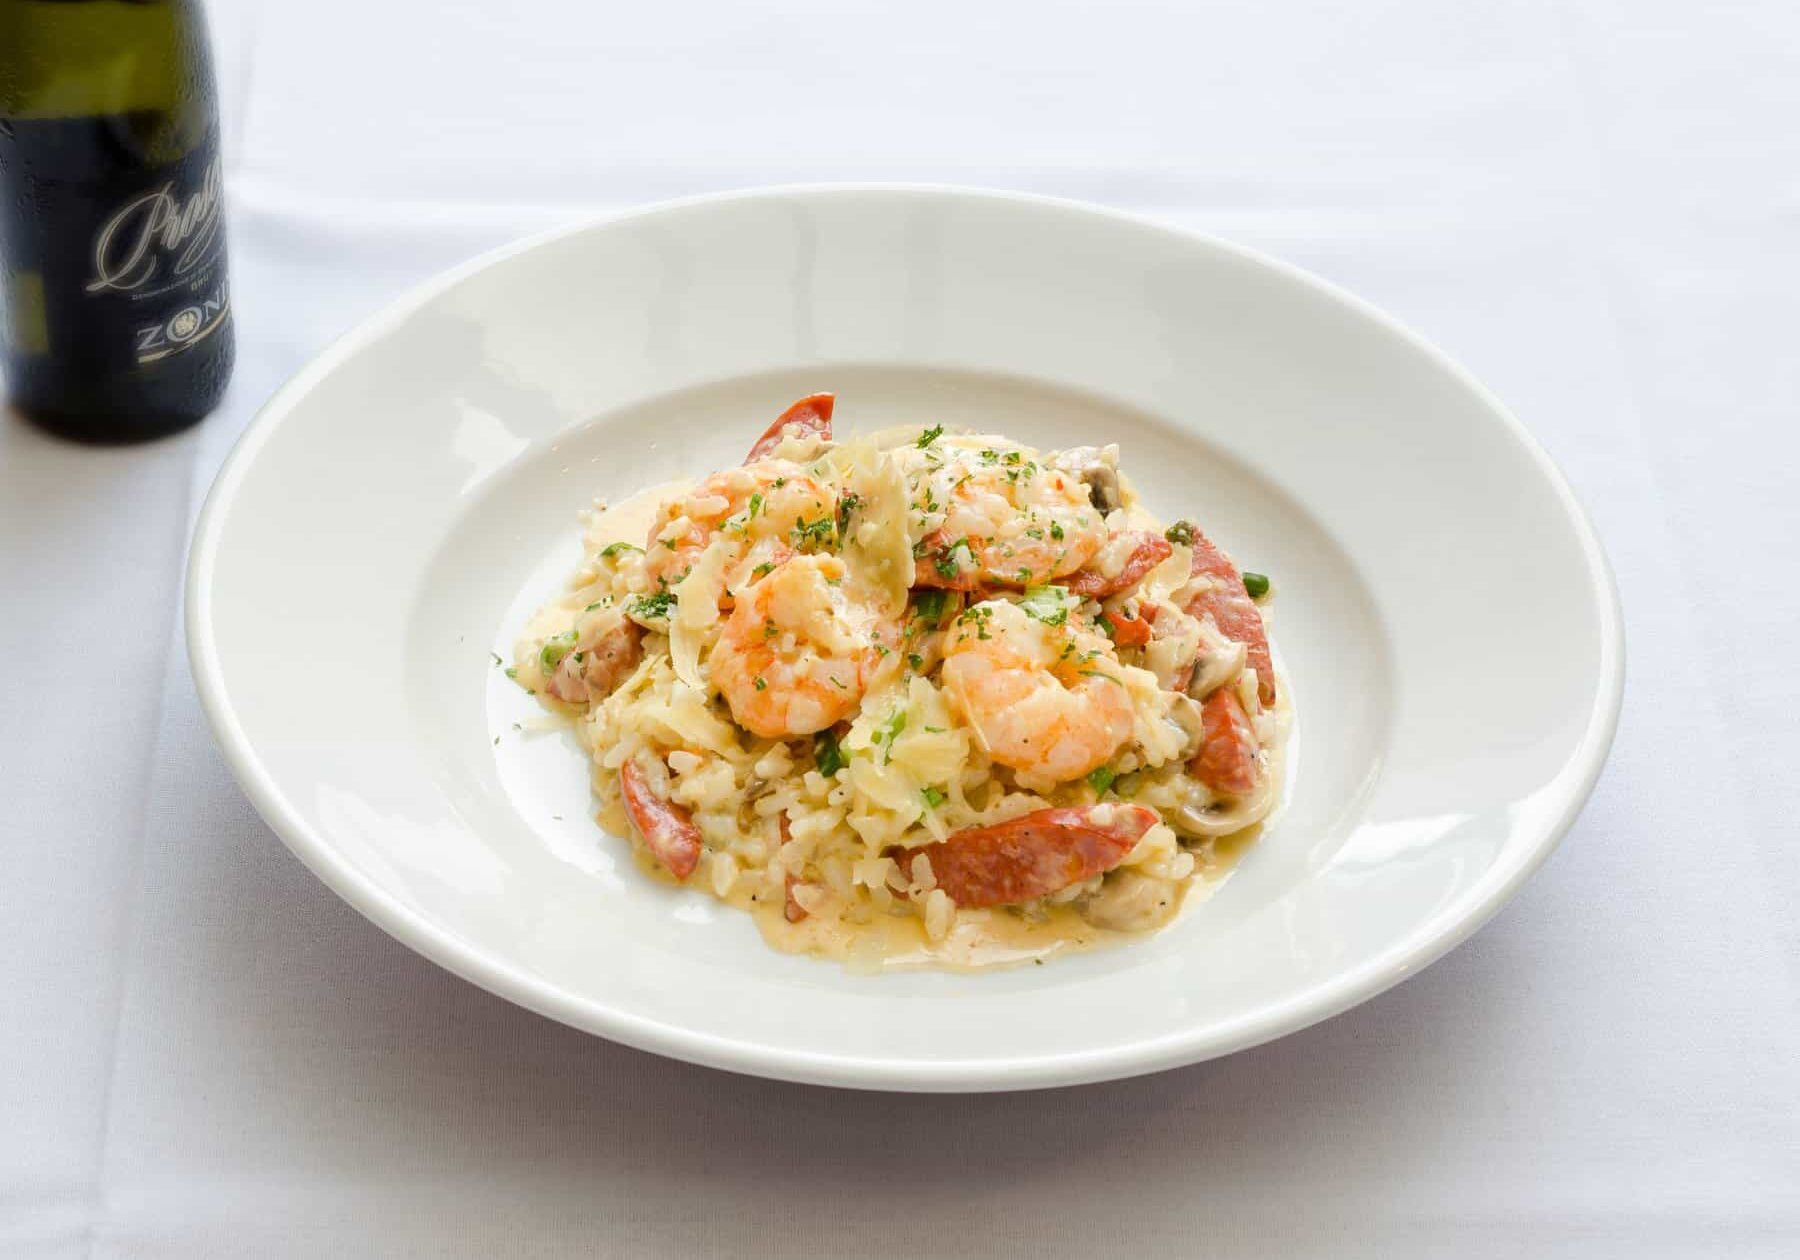 Shrimp And Lobster Risotto Garnished With Herbs.